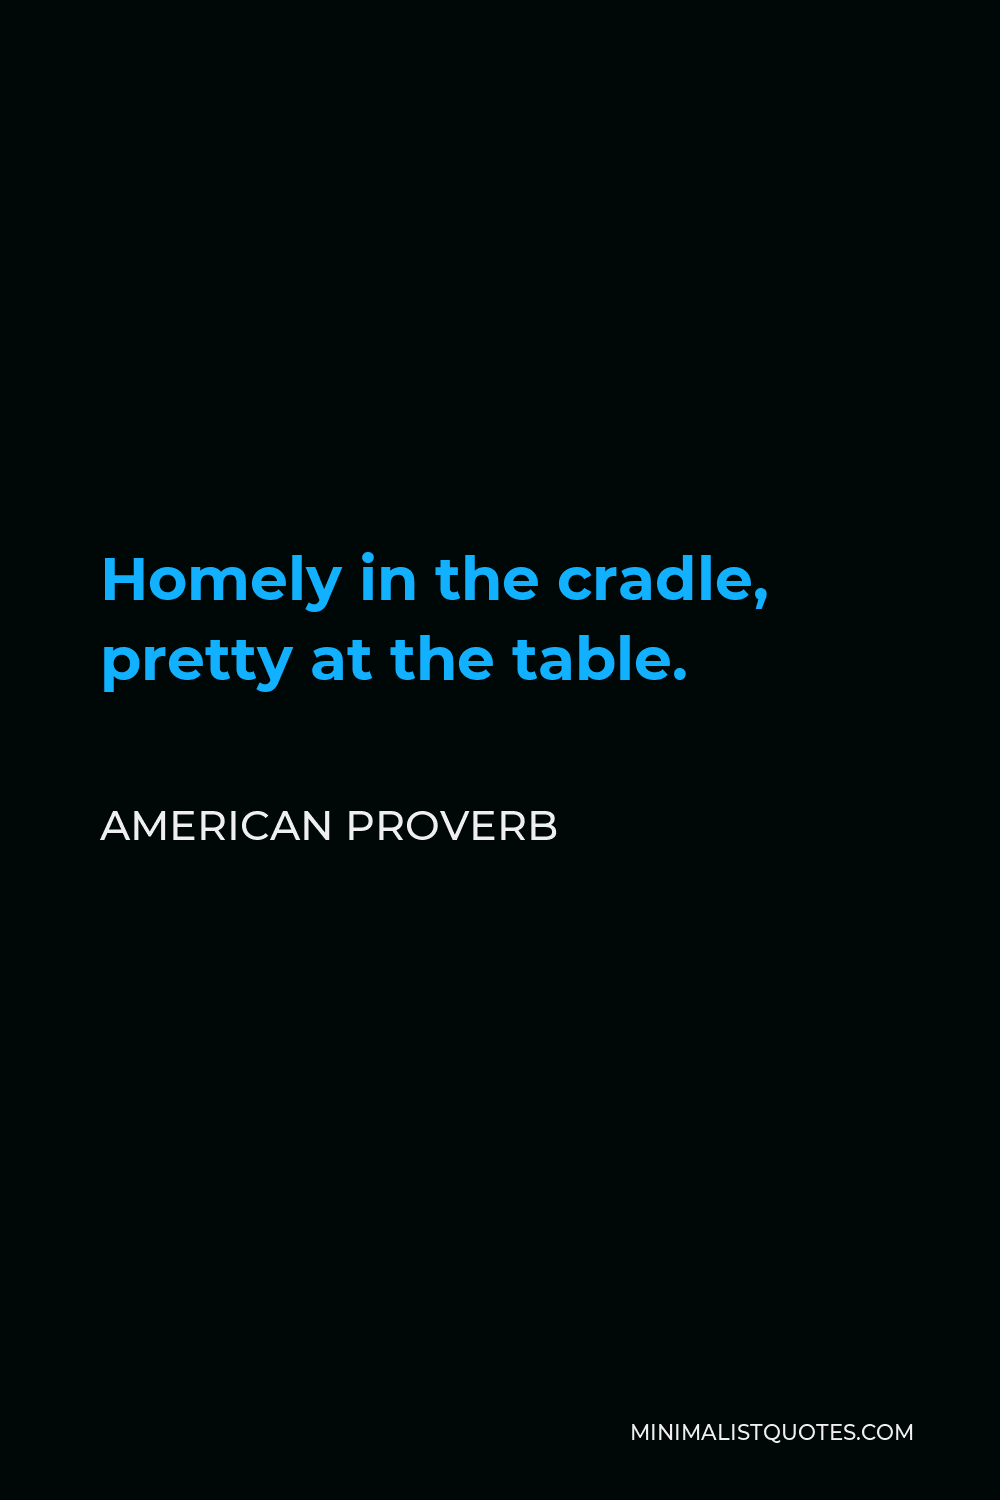 American Proverb Quote - Homely in the cradle, pretty at the table.